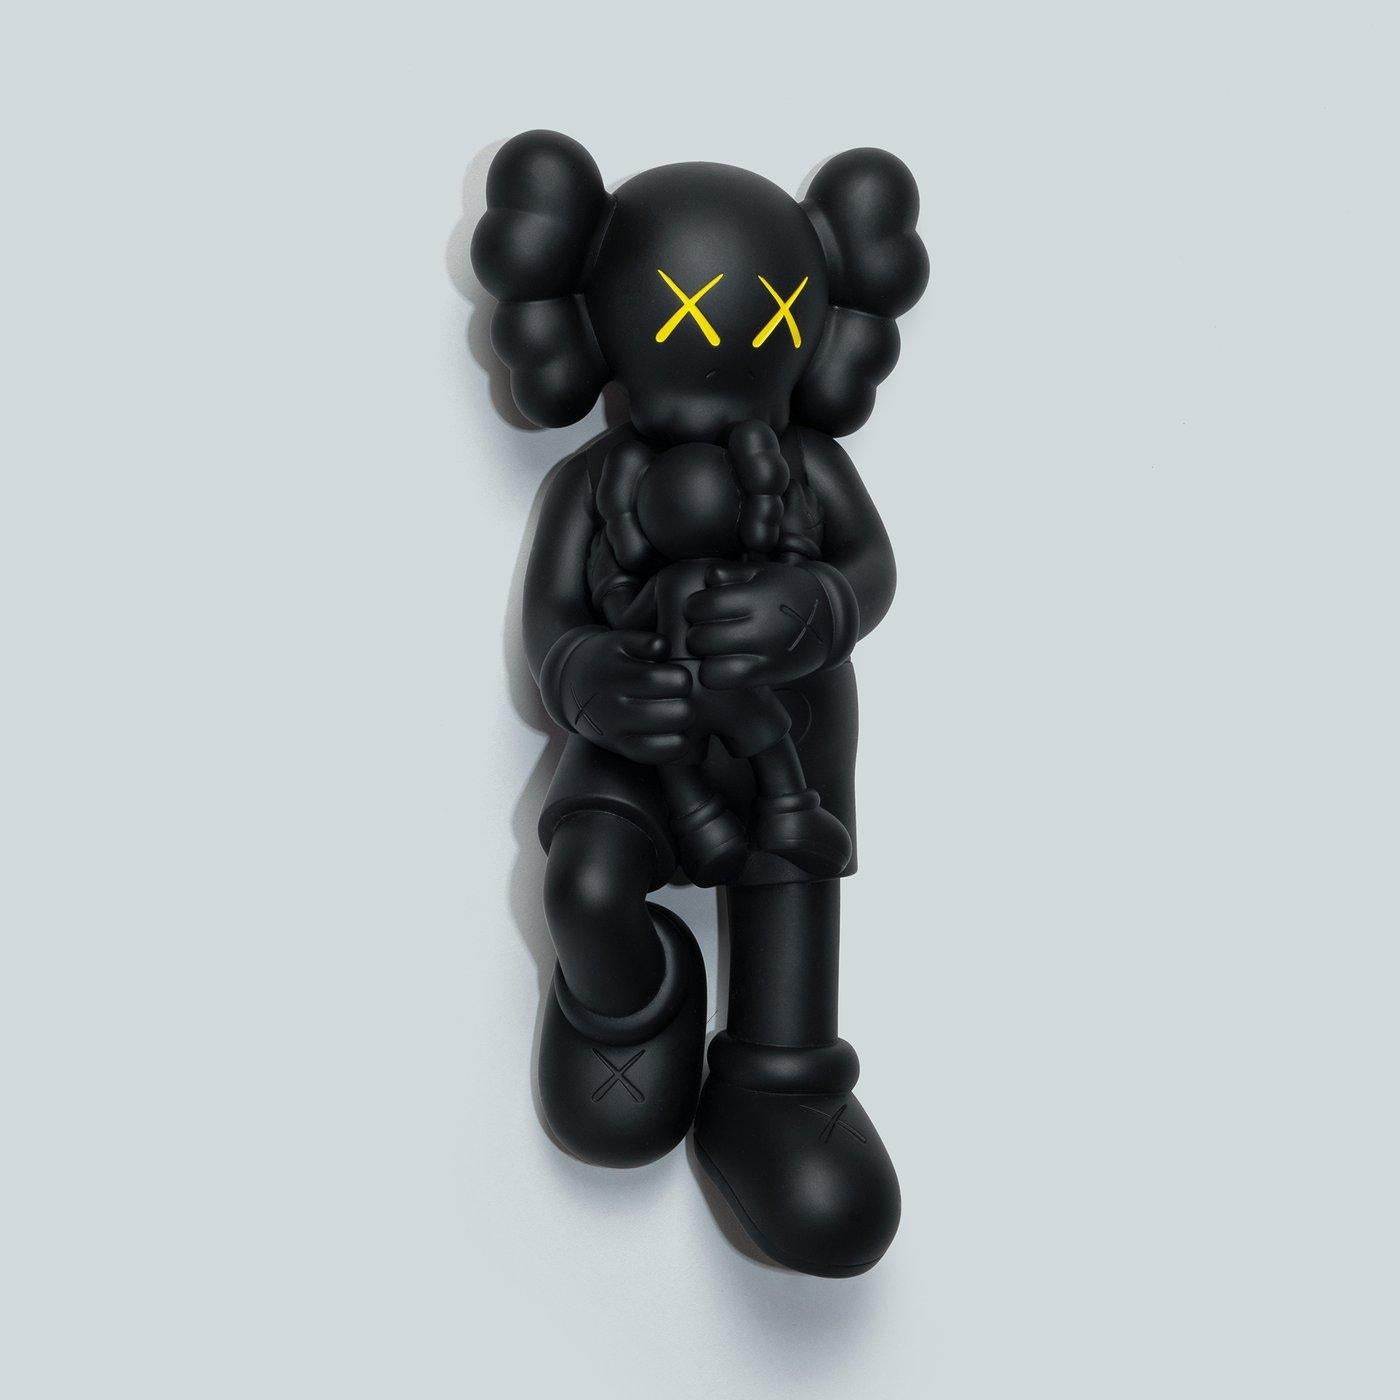 KAWS Black Holiday Companion (KAWS Singapore): 
This standout KAWS art toy features KAWS' signature character COMPANION in a resting position. Published to commemorate the debut of KAWS’ 42-meter inflatable work of same along Singapore's Marina Bay